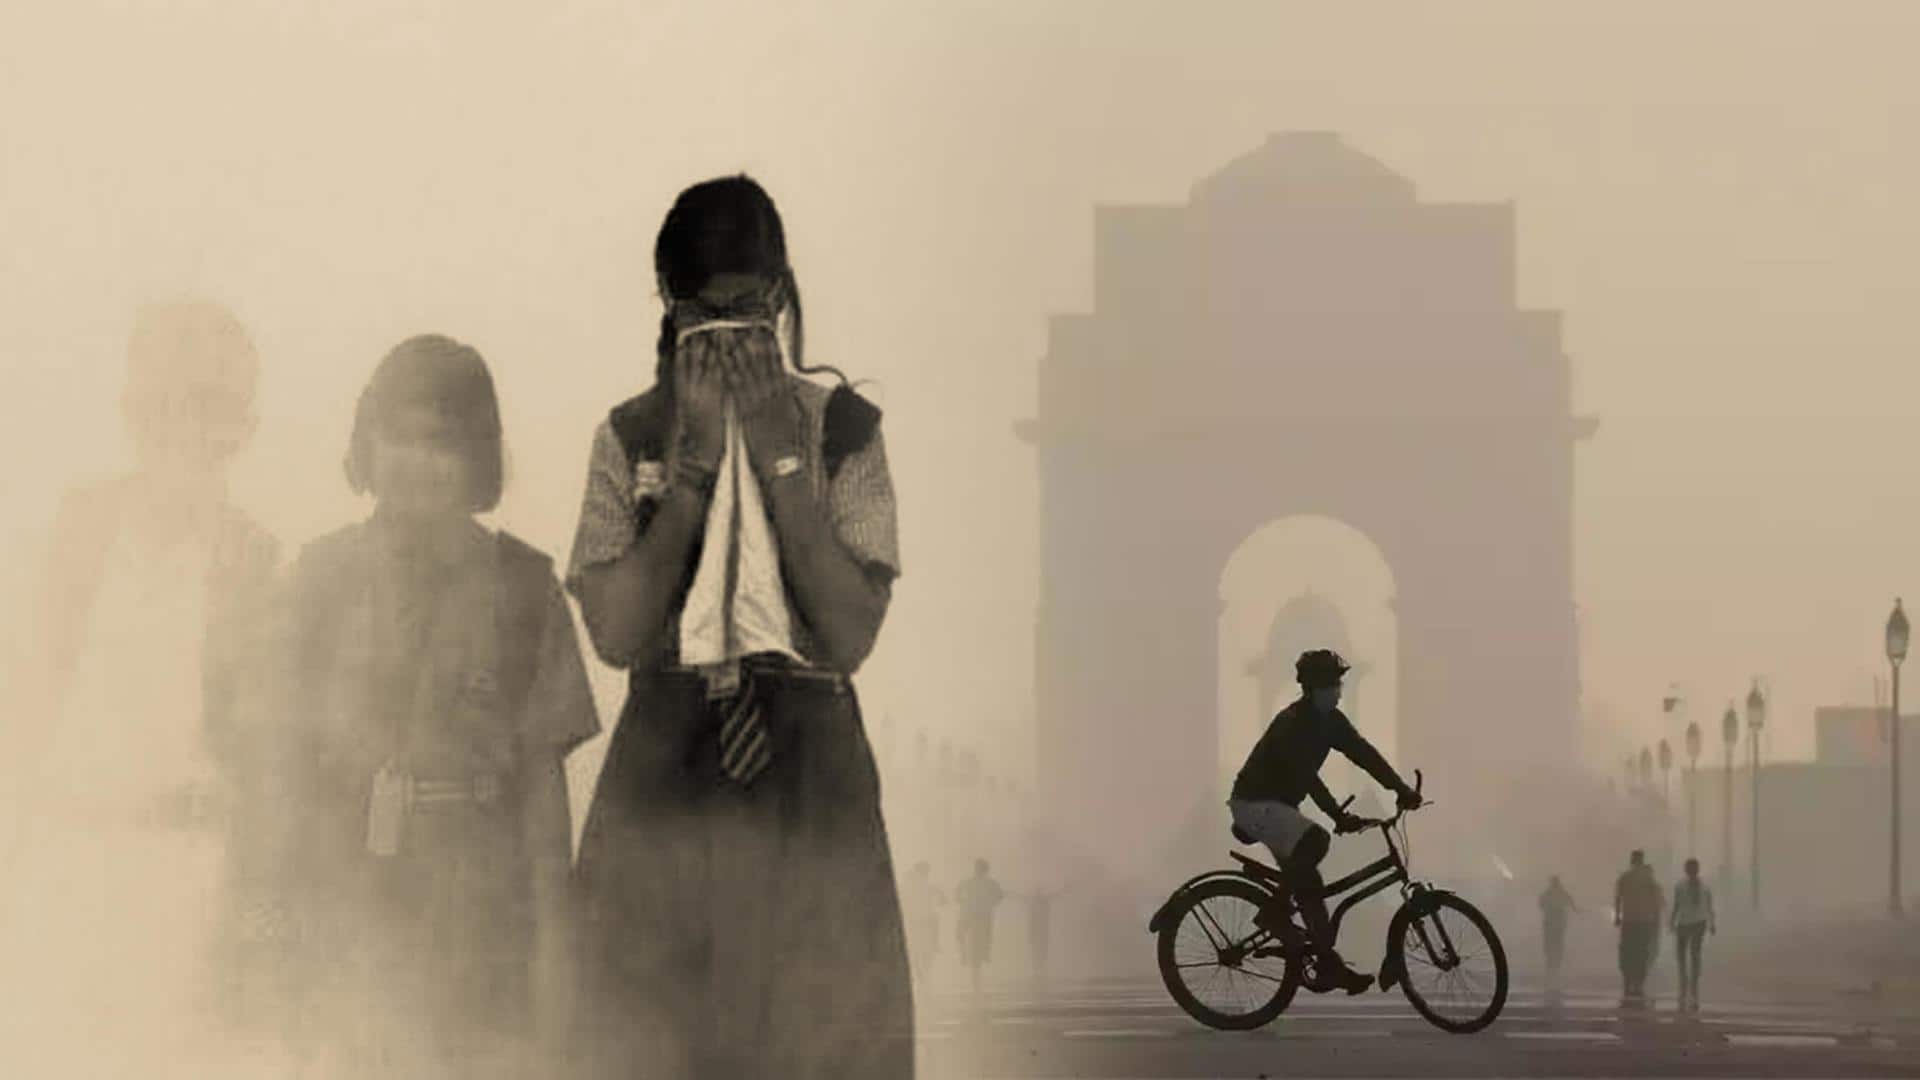 Primary schools reopen as Delhi remains under thick smog blanket